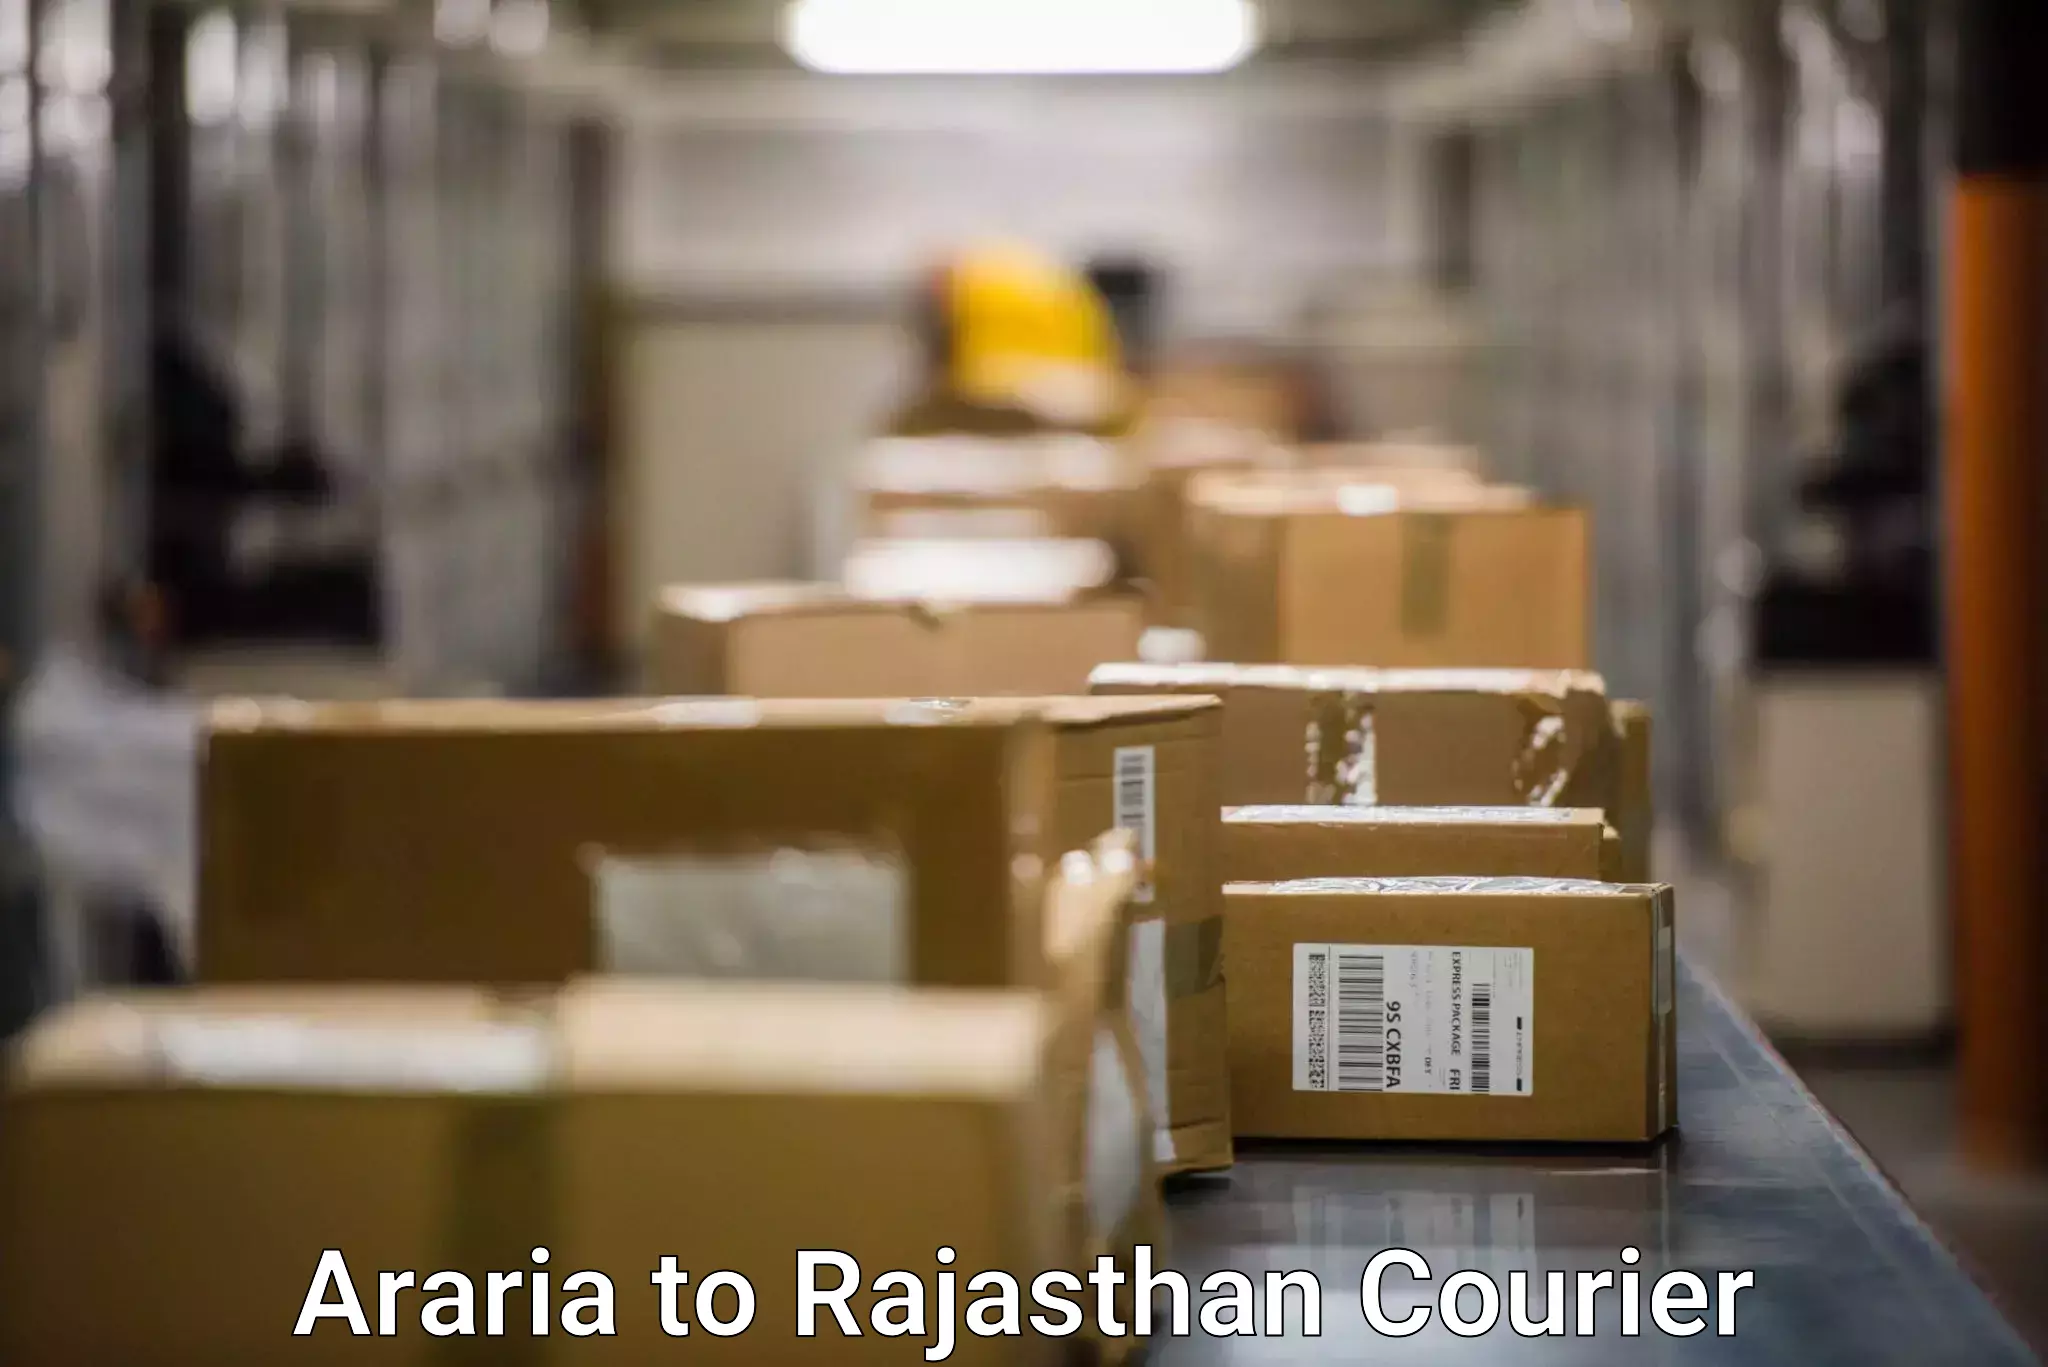 Delivery service partnership Araria to Renwal